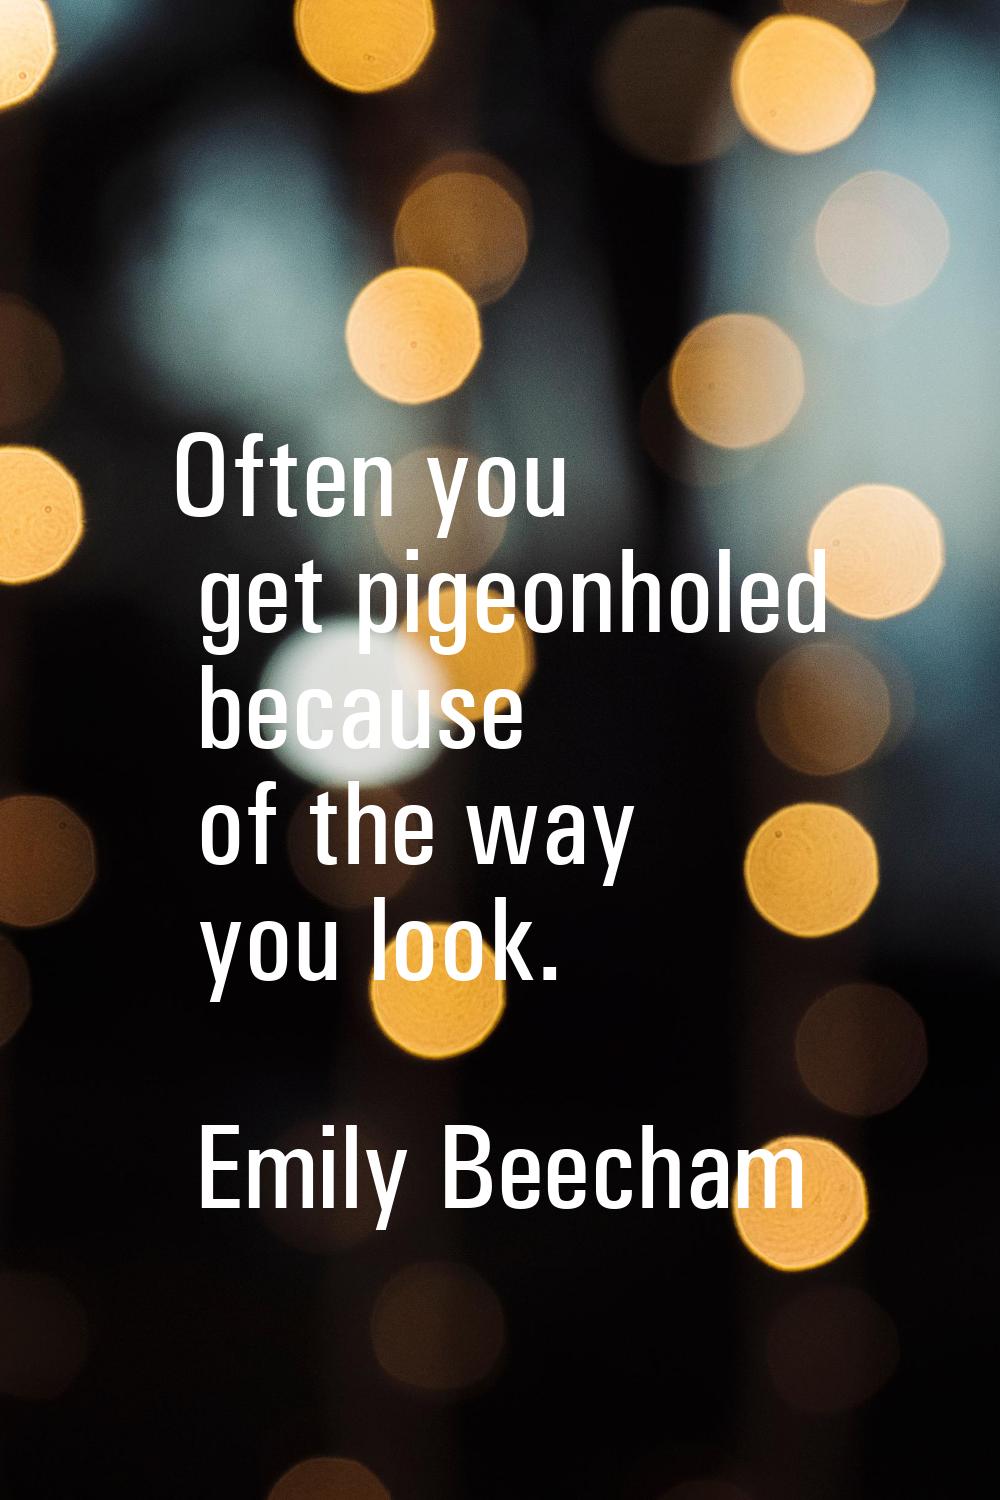 Often you get pigeonholed because of the way you look.